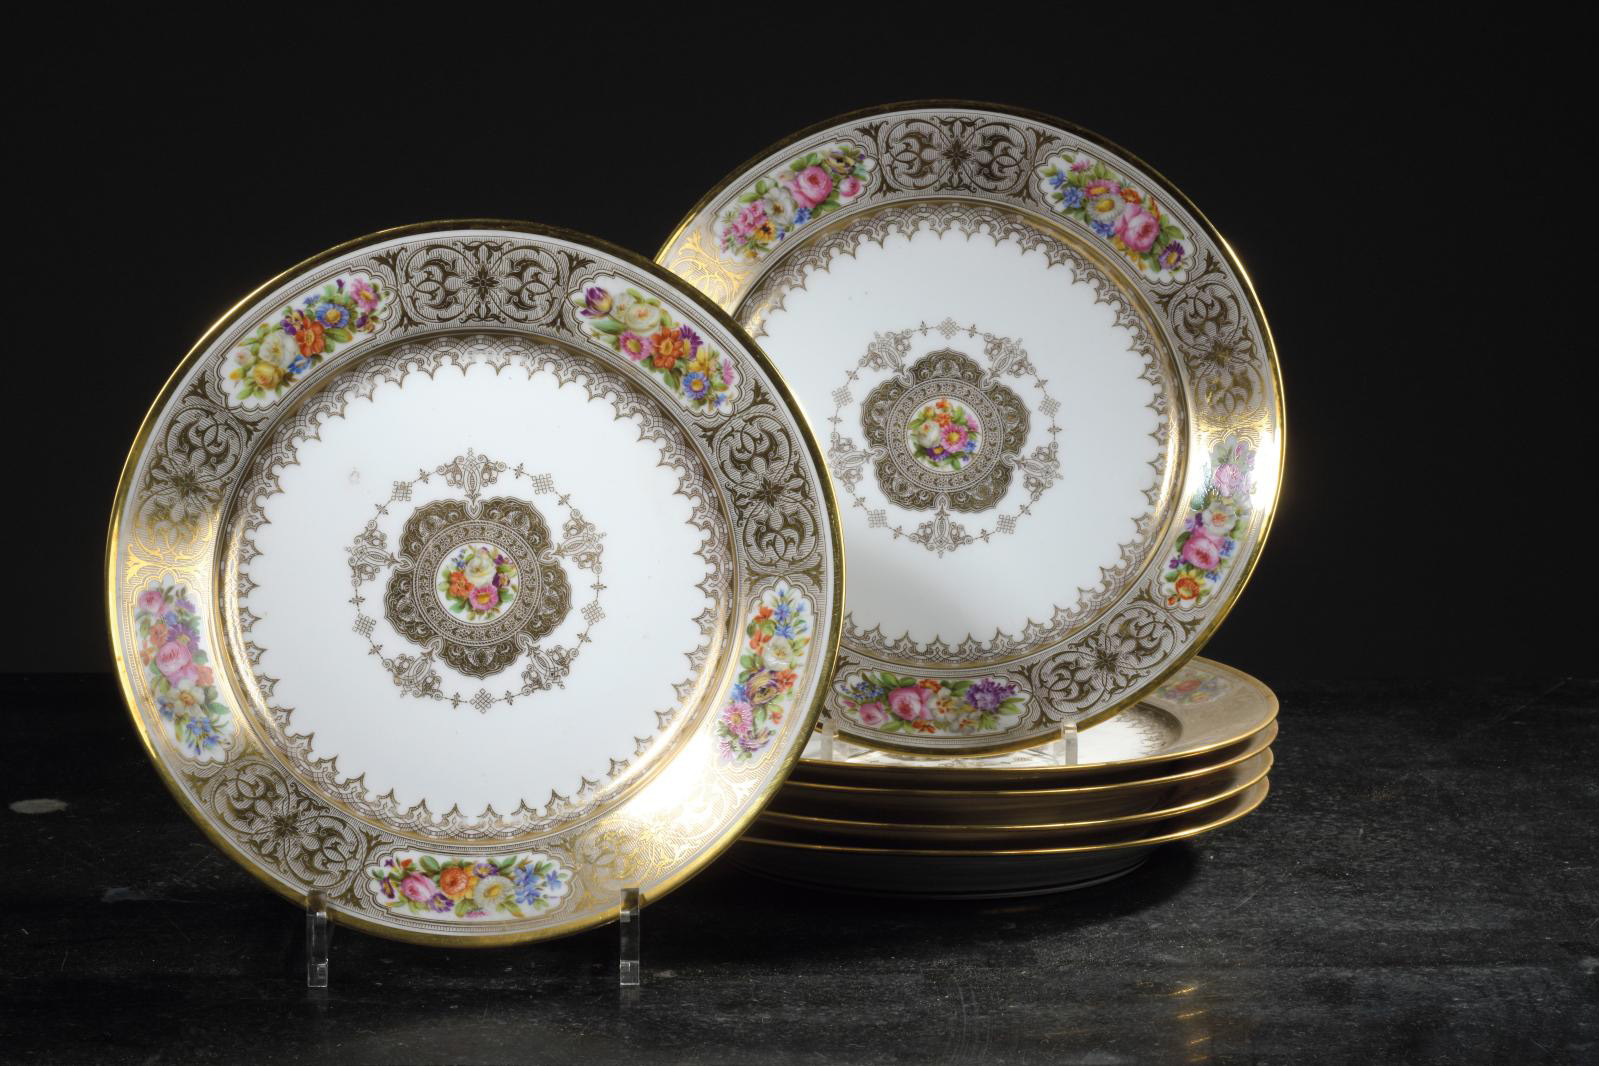 King Louis-Philippe’s Sèvres China Goes Back to Versailles 